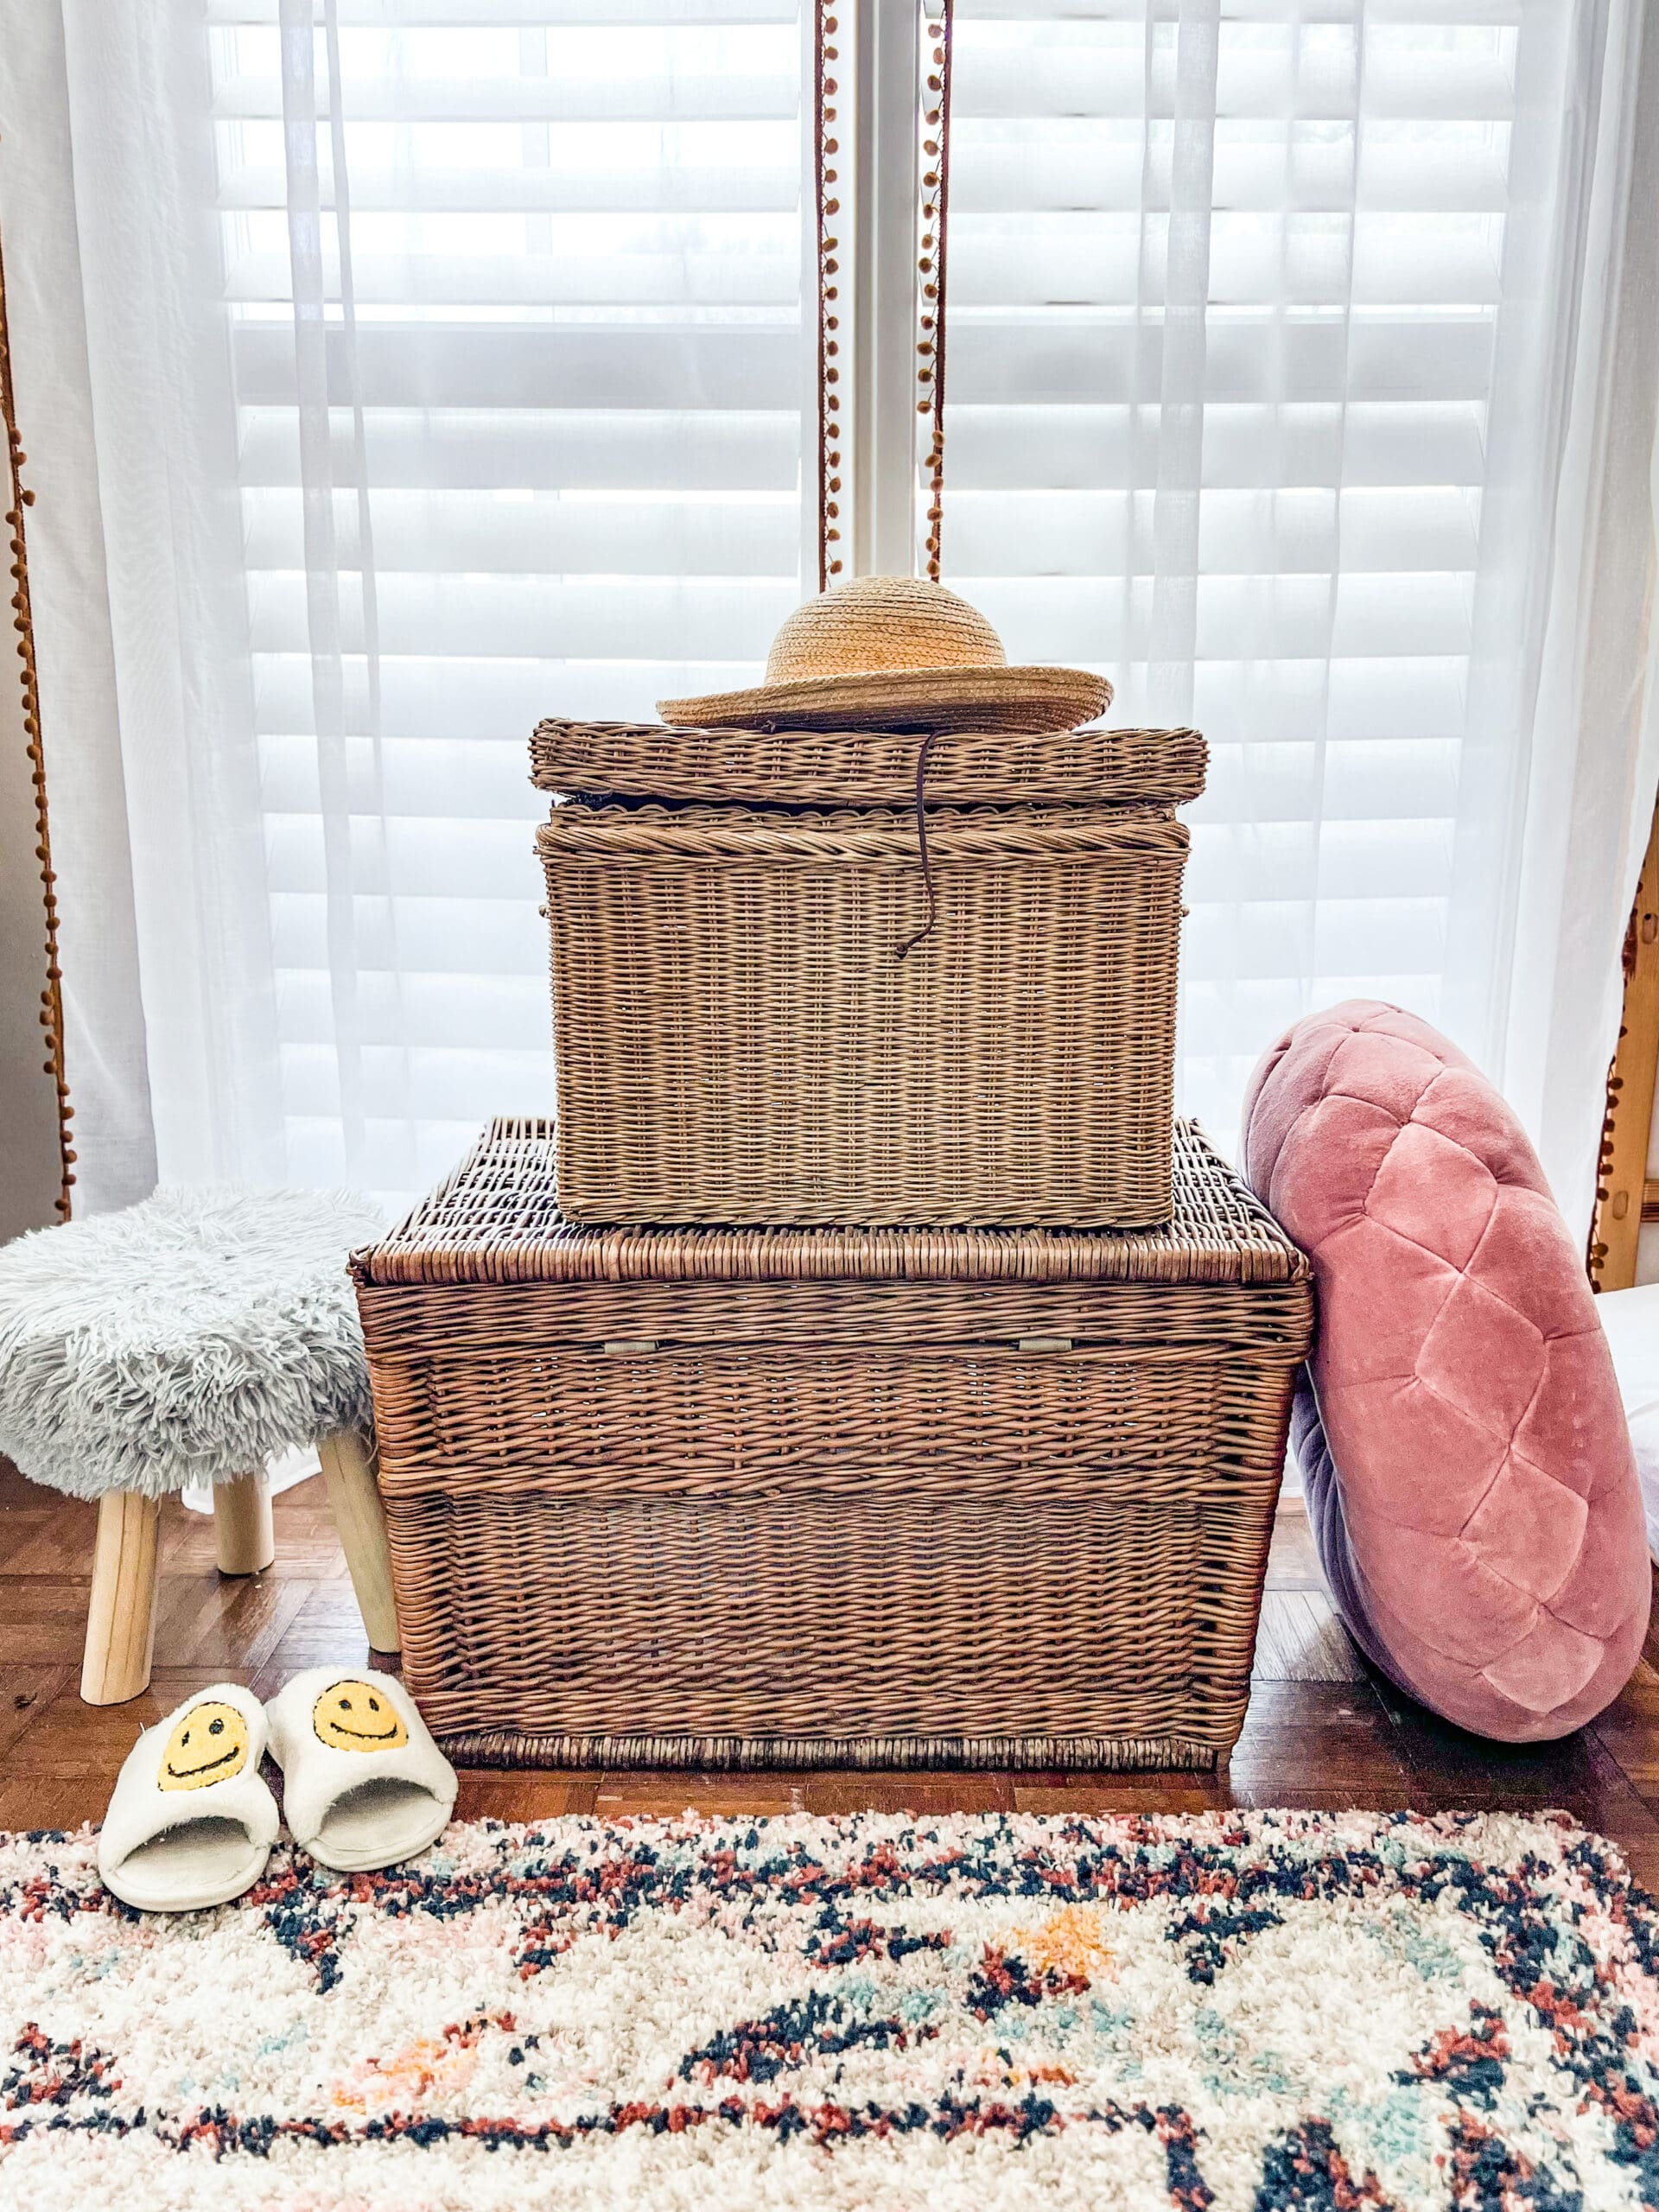 Large baskets stacked on top of each other with smiley face slippers and a large pillow next to it